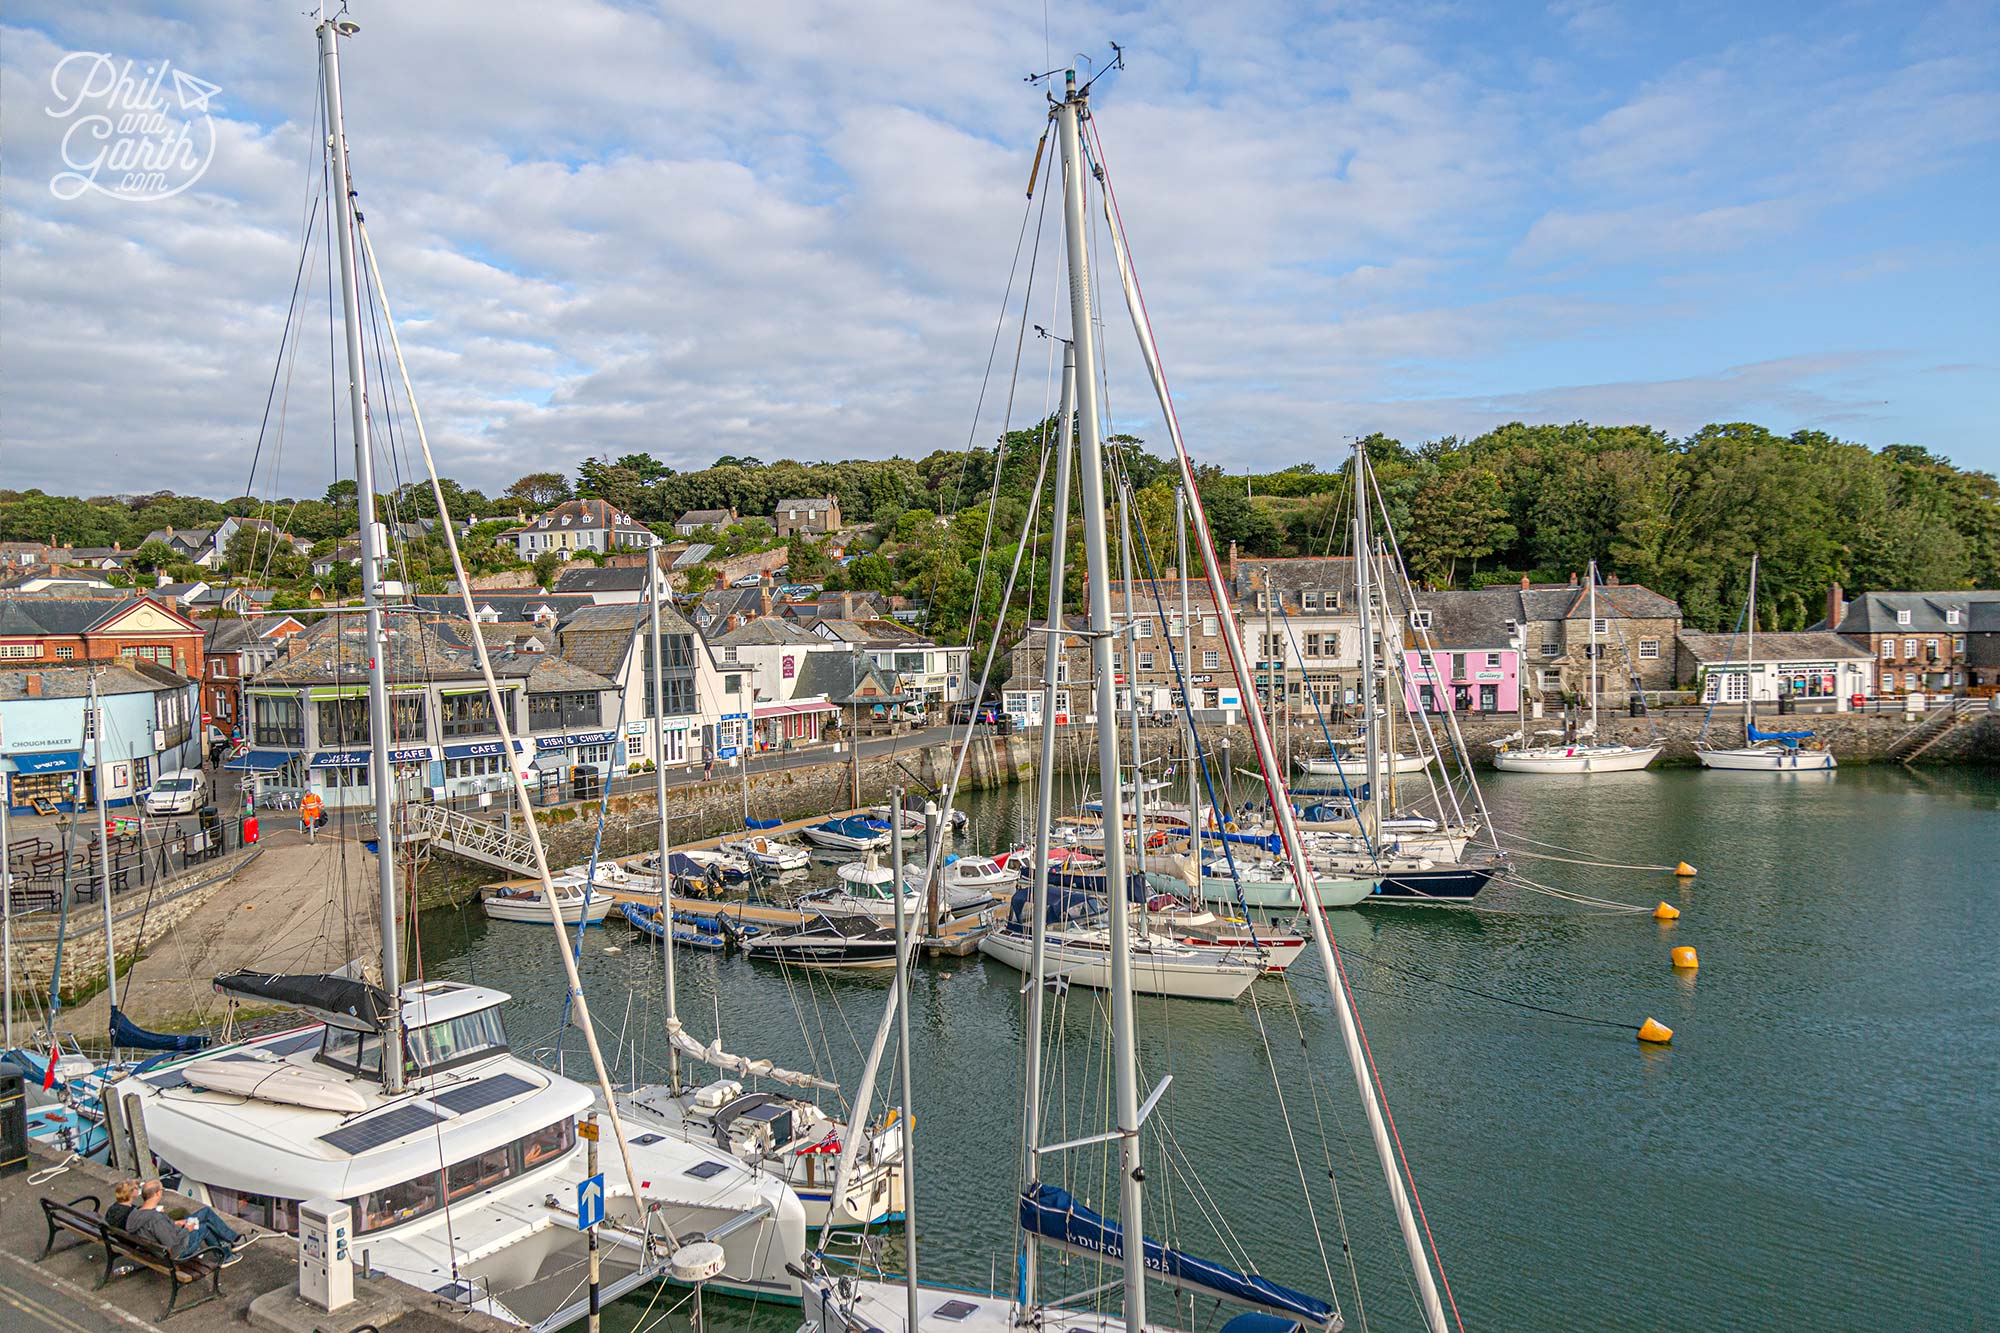 Padstow is a tourist mecca for Rick Stein fans